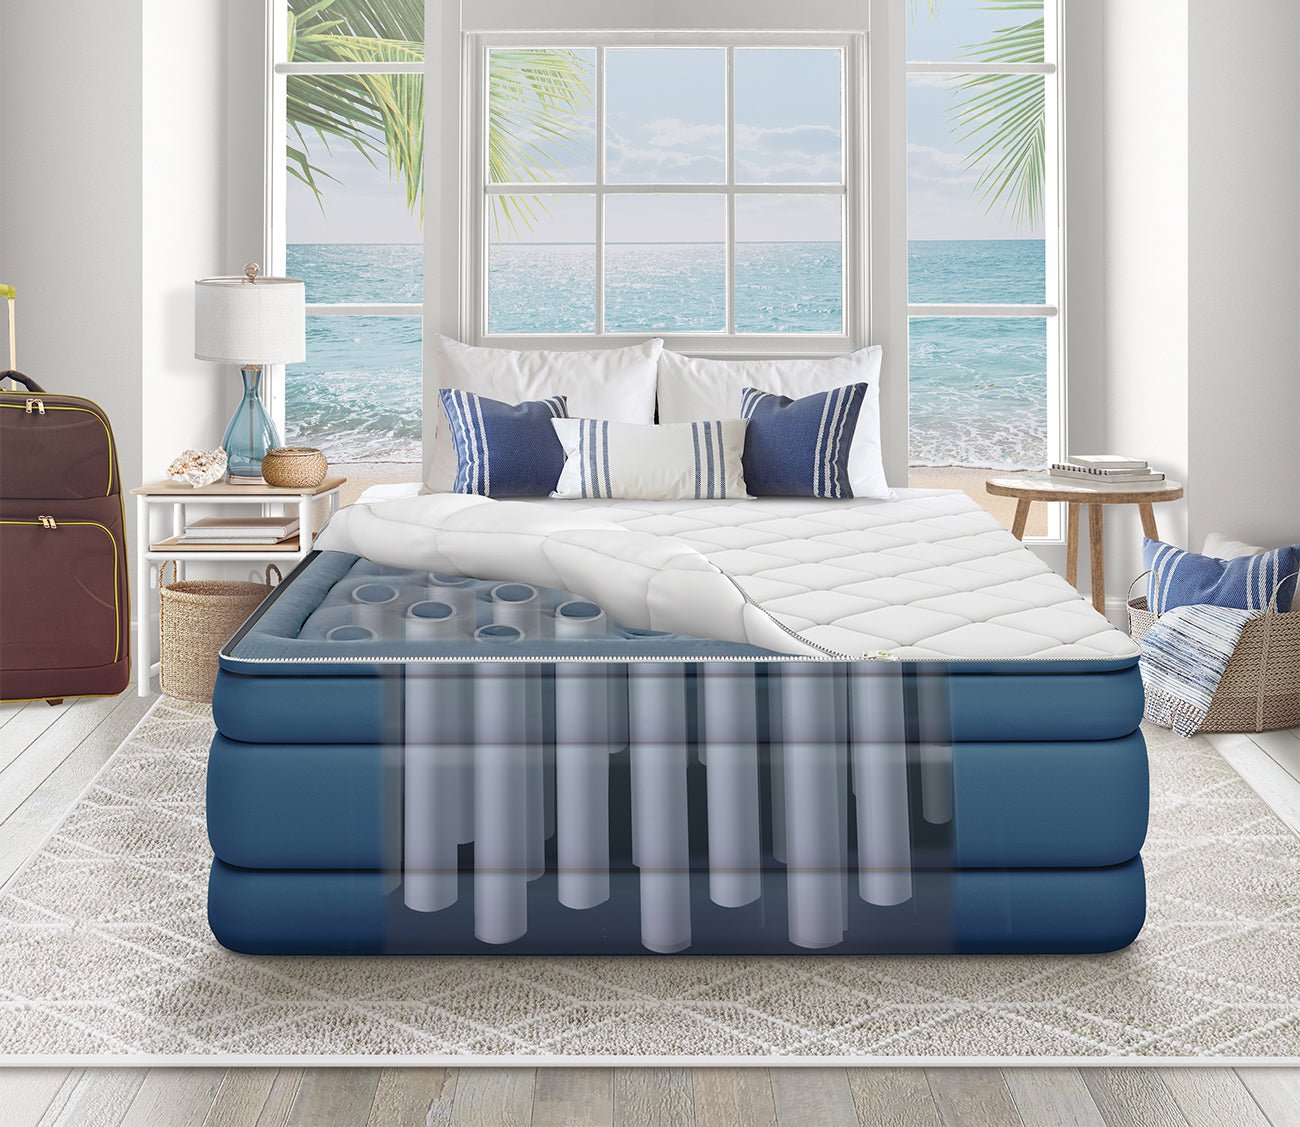 Cloud Supreme 20" Raised Air Mattress with Zip-Off Pillowtop by Nautica